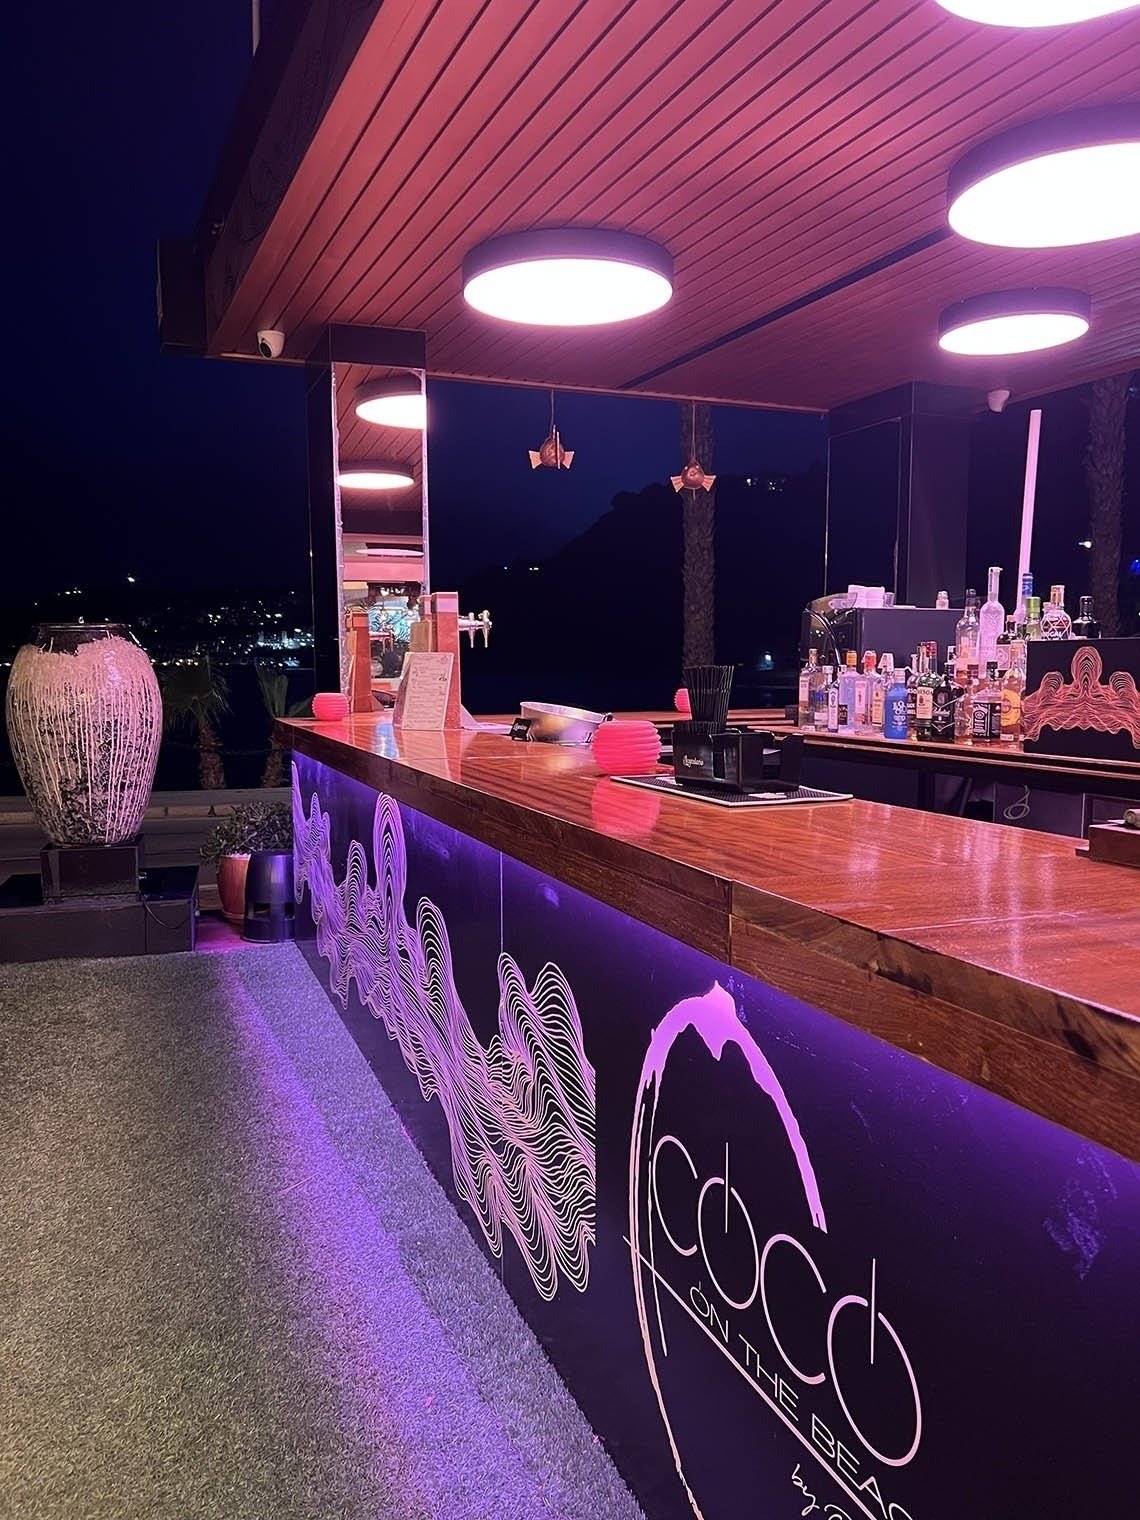 a bar called coco on the beach is lit up at night